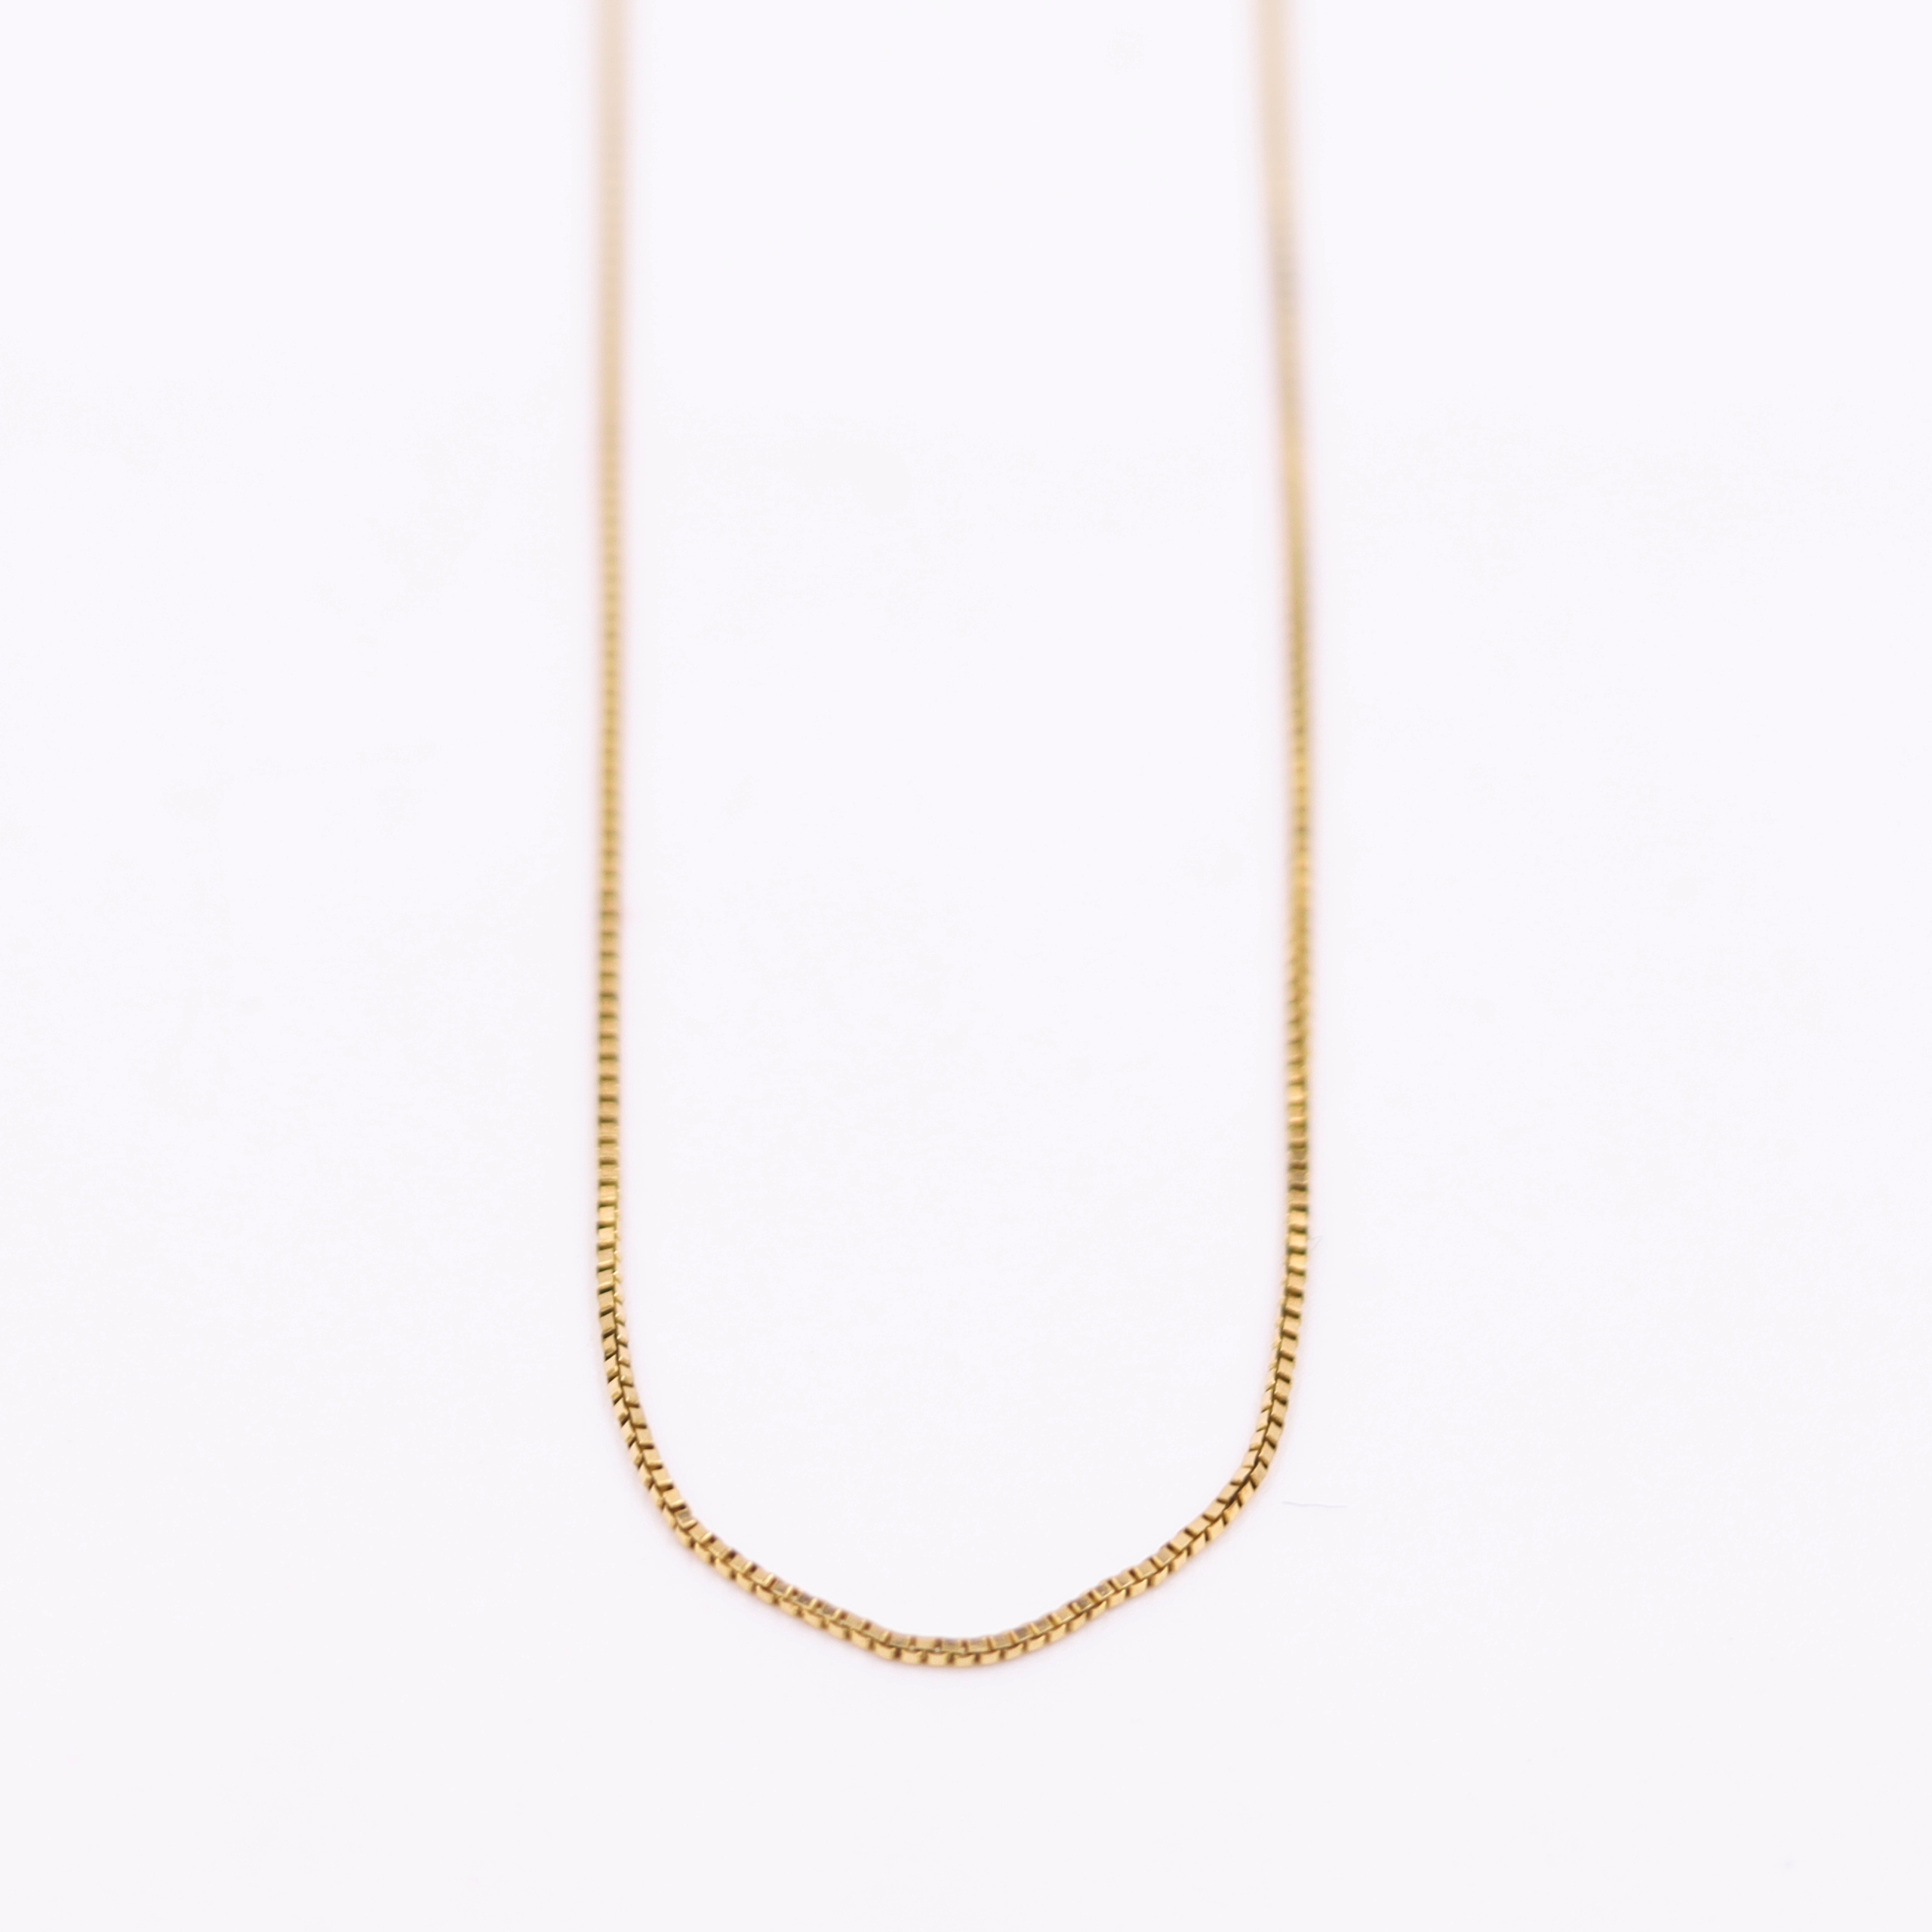 Stylish Imperial Gold Chain